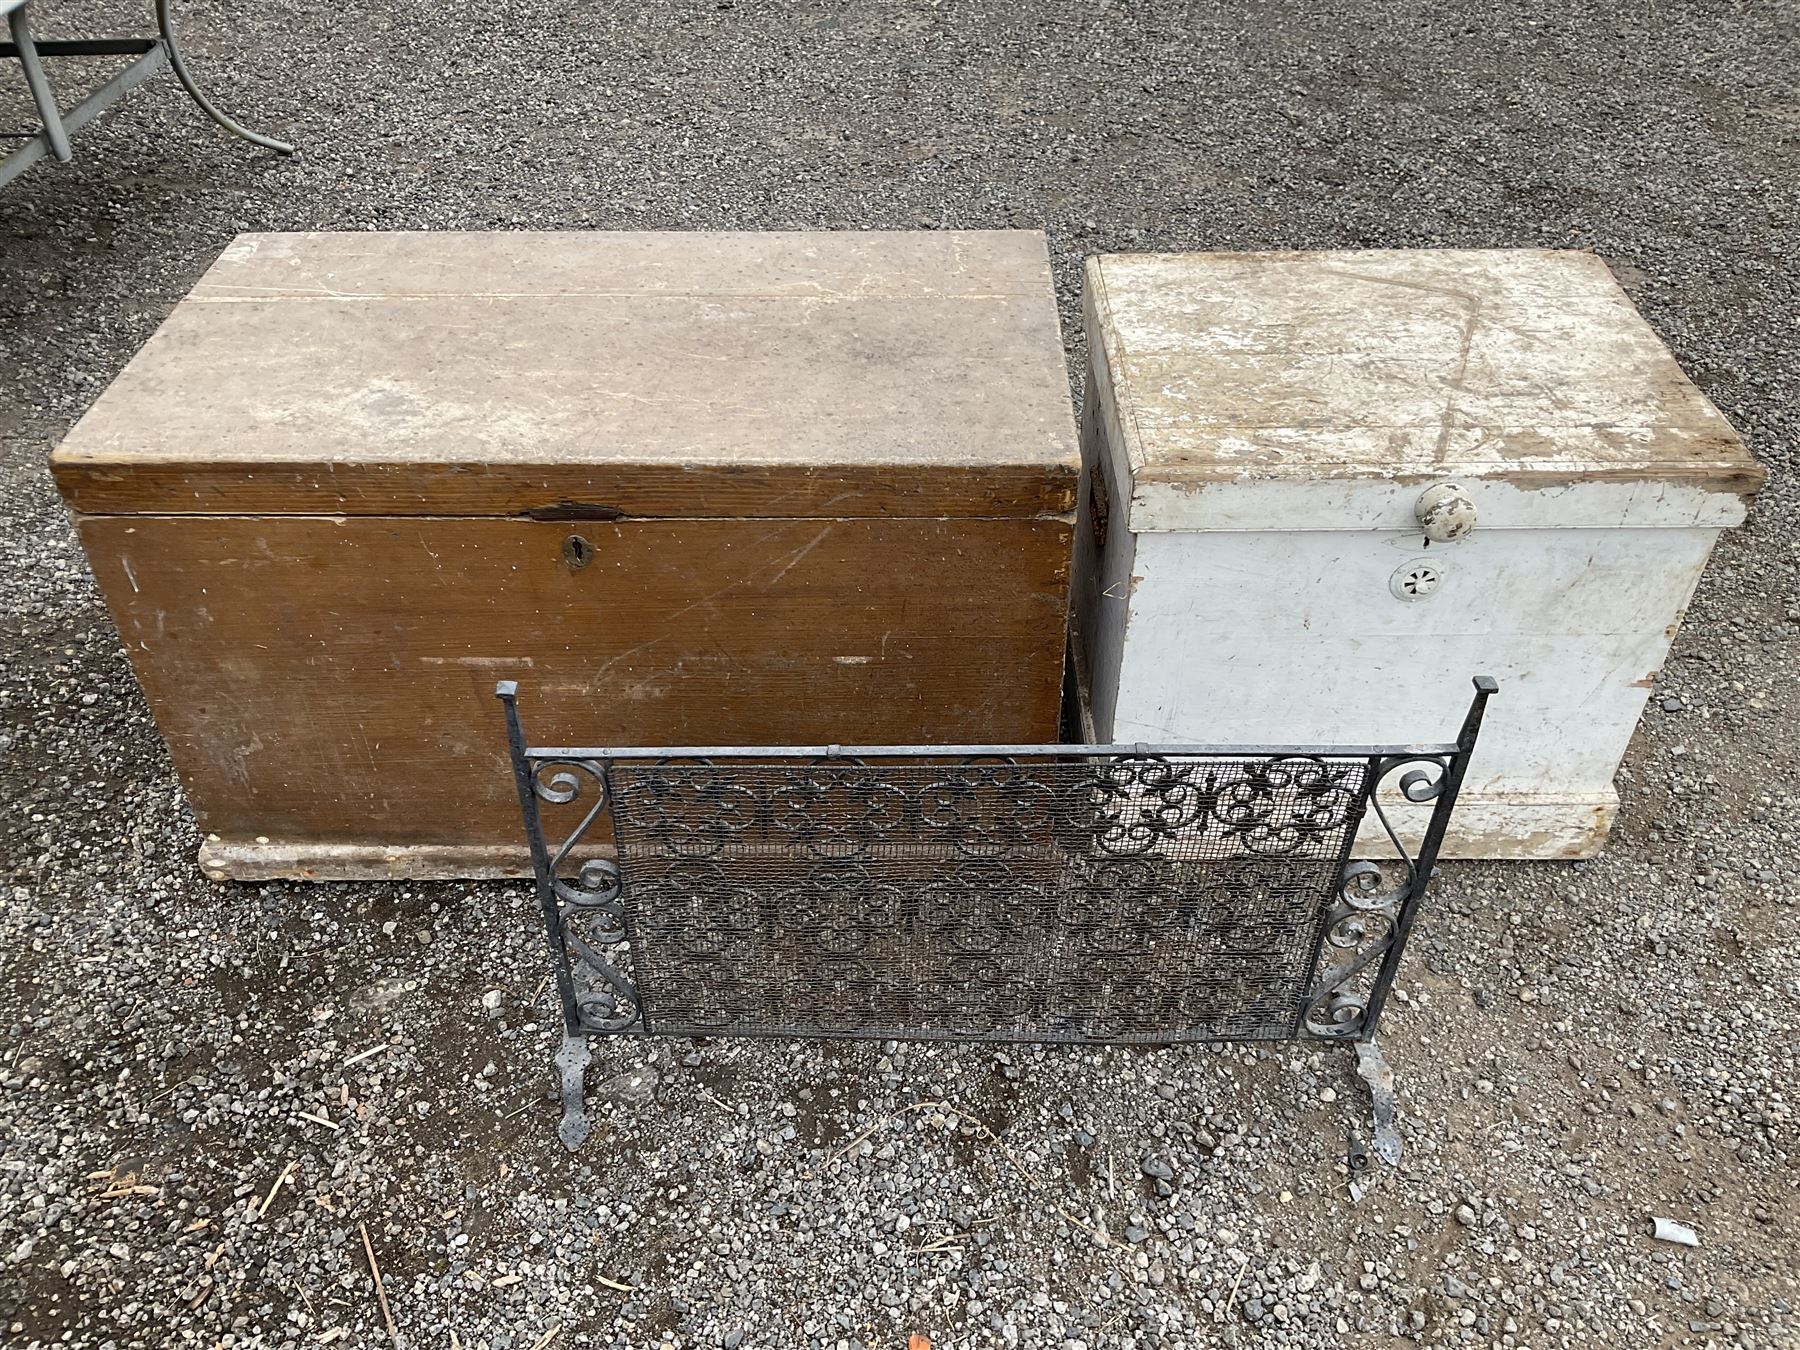 Pair of large wooden chests and painted metal fire screen - THIS LOT IS TO BE COLLECTED BY APPOINTM